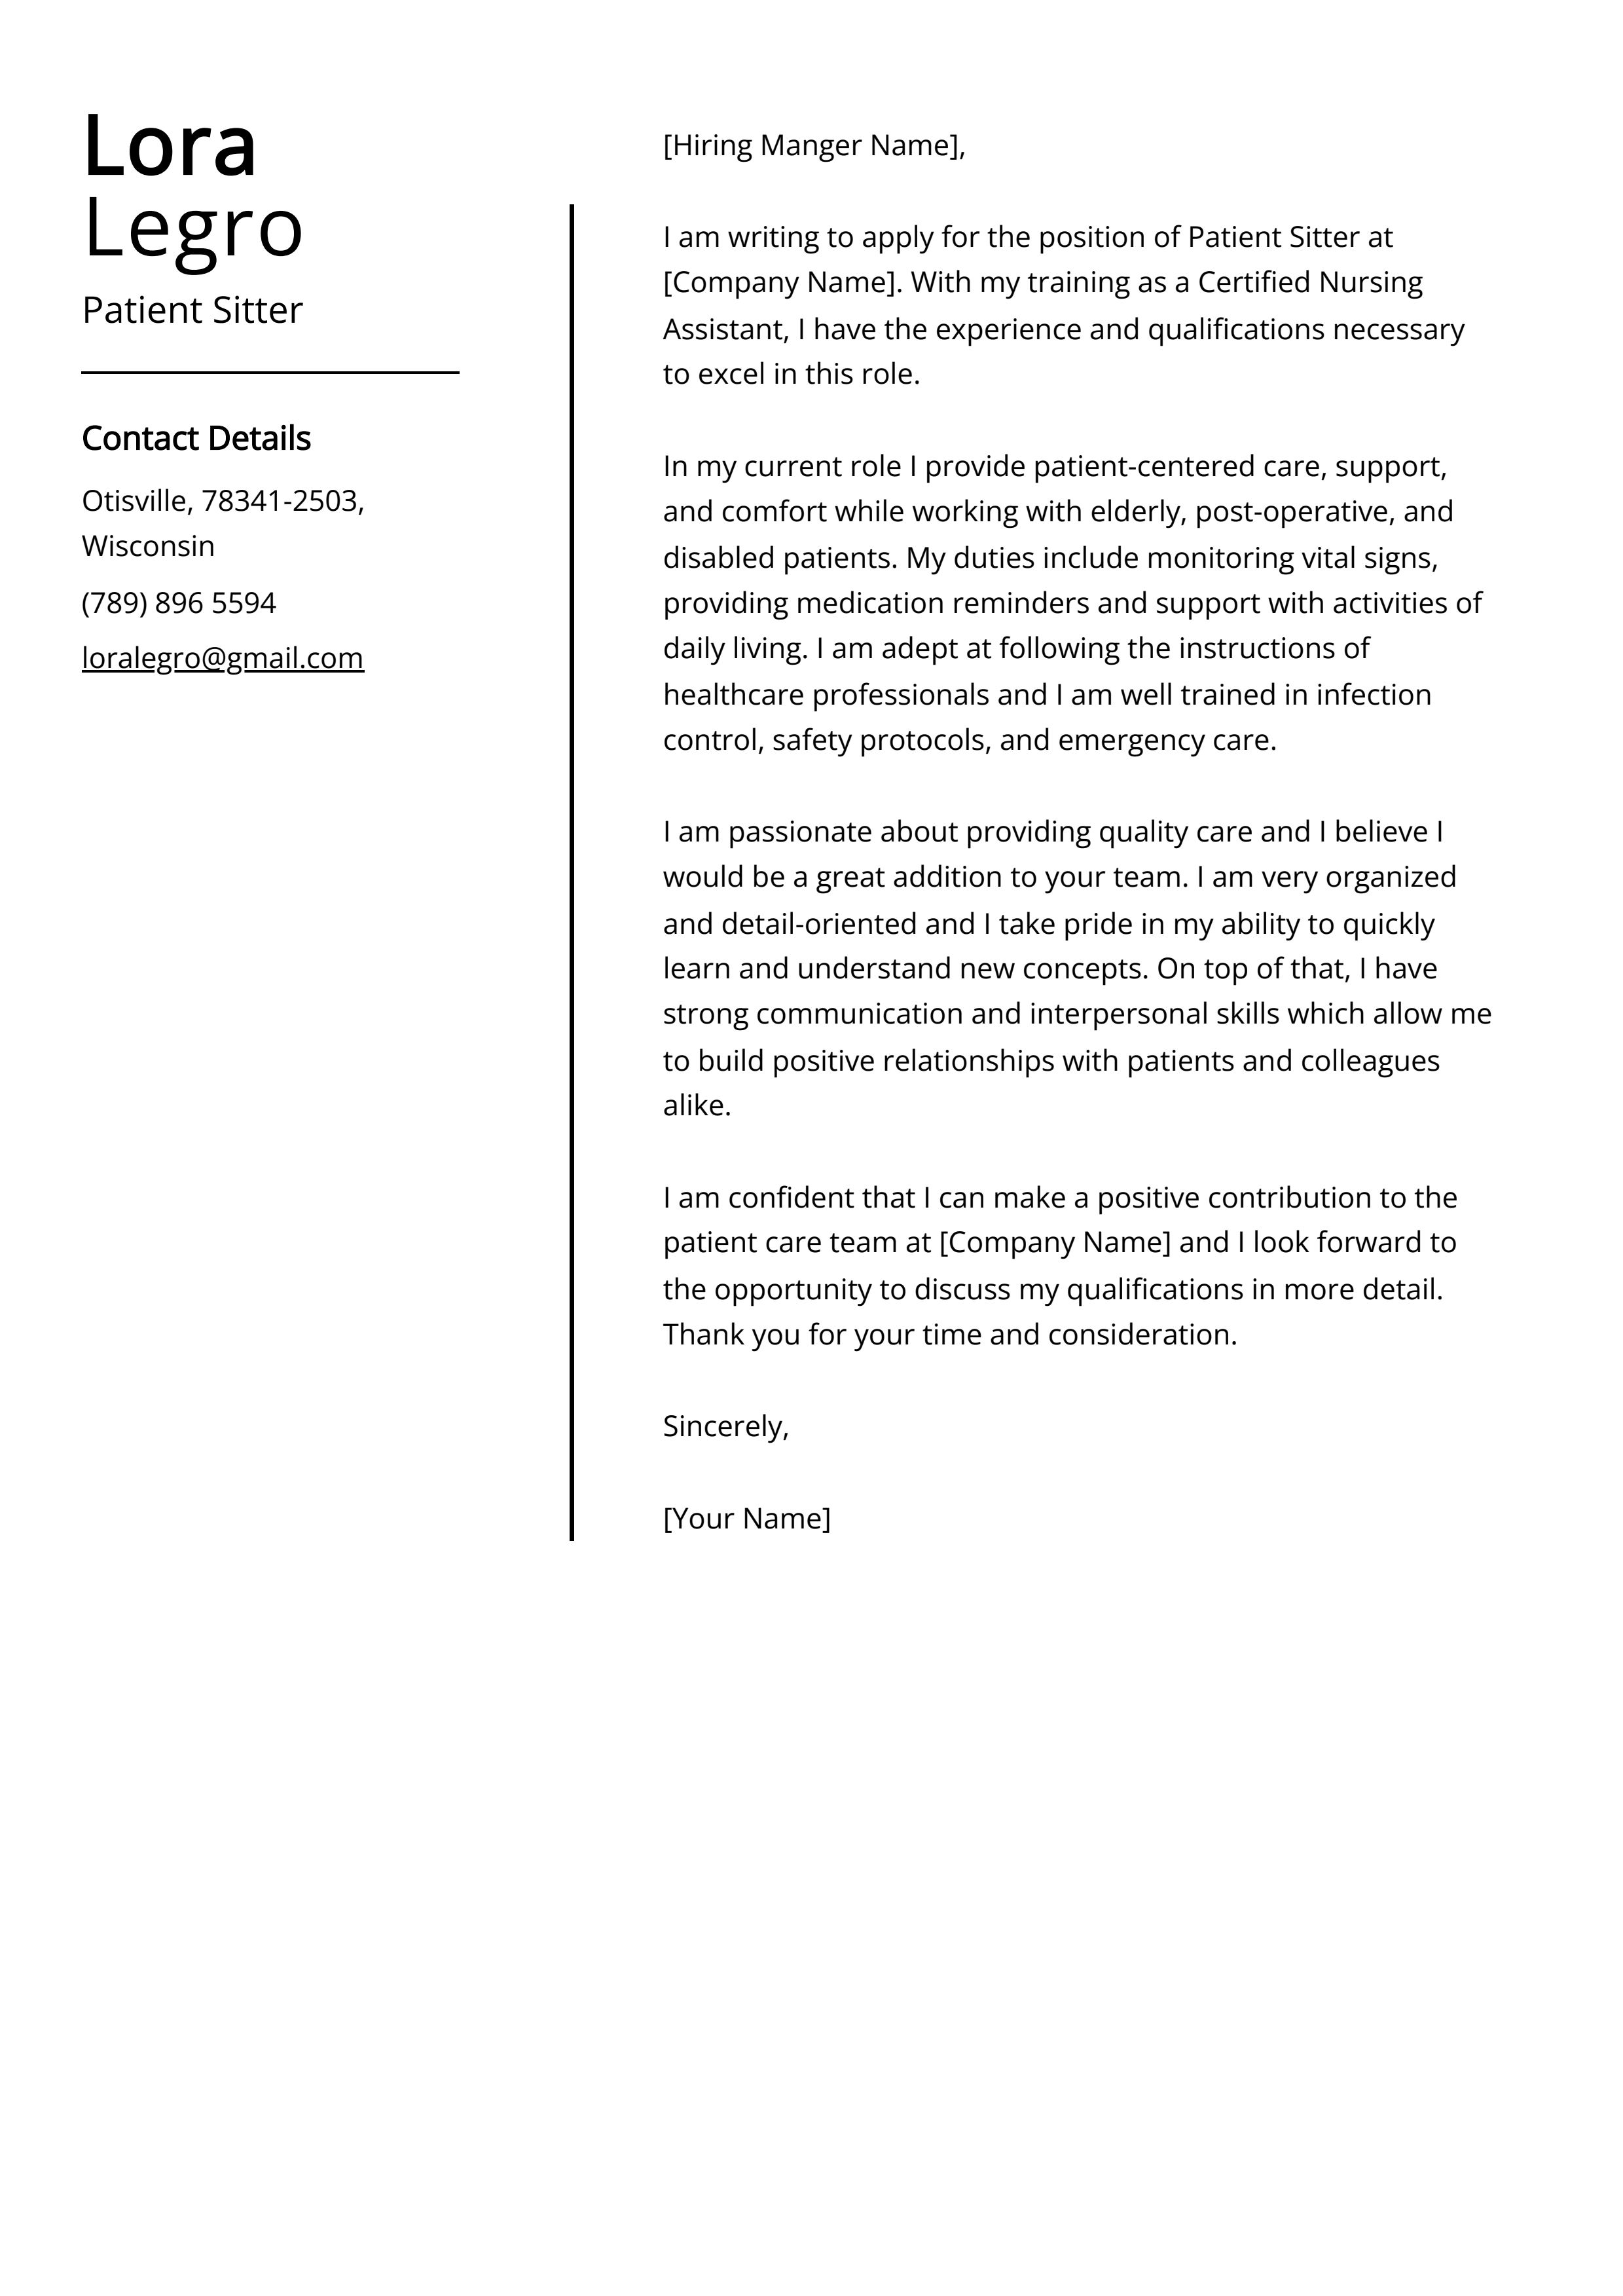 Patient Sitter Cover Letter Example